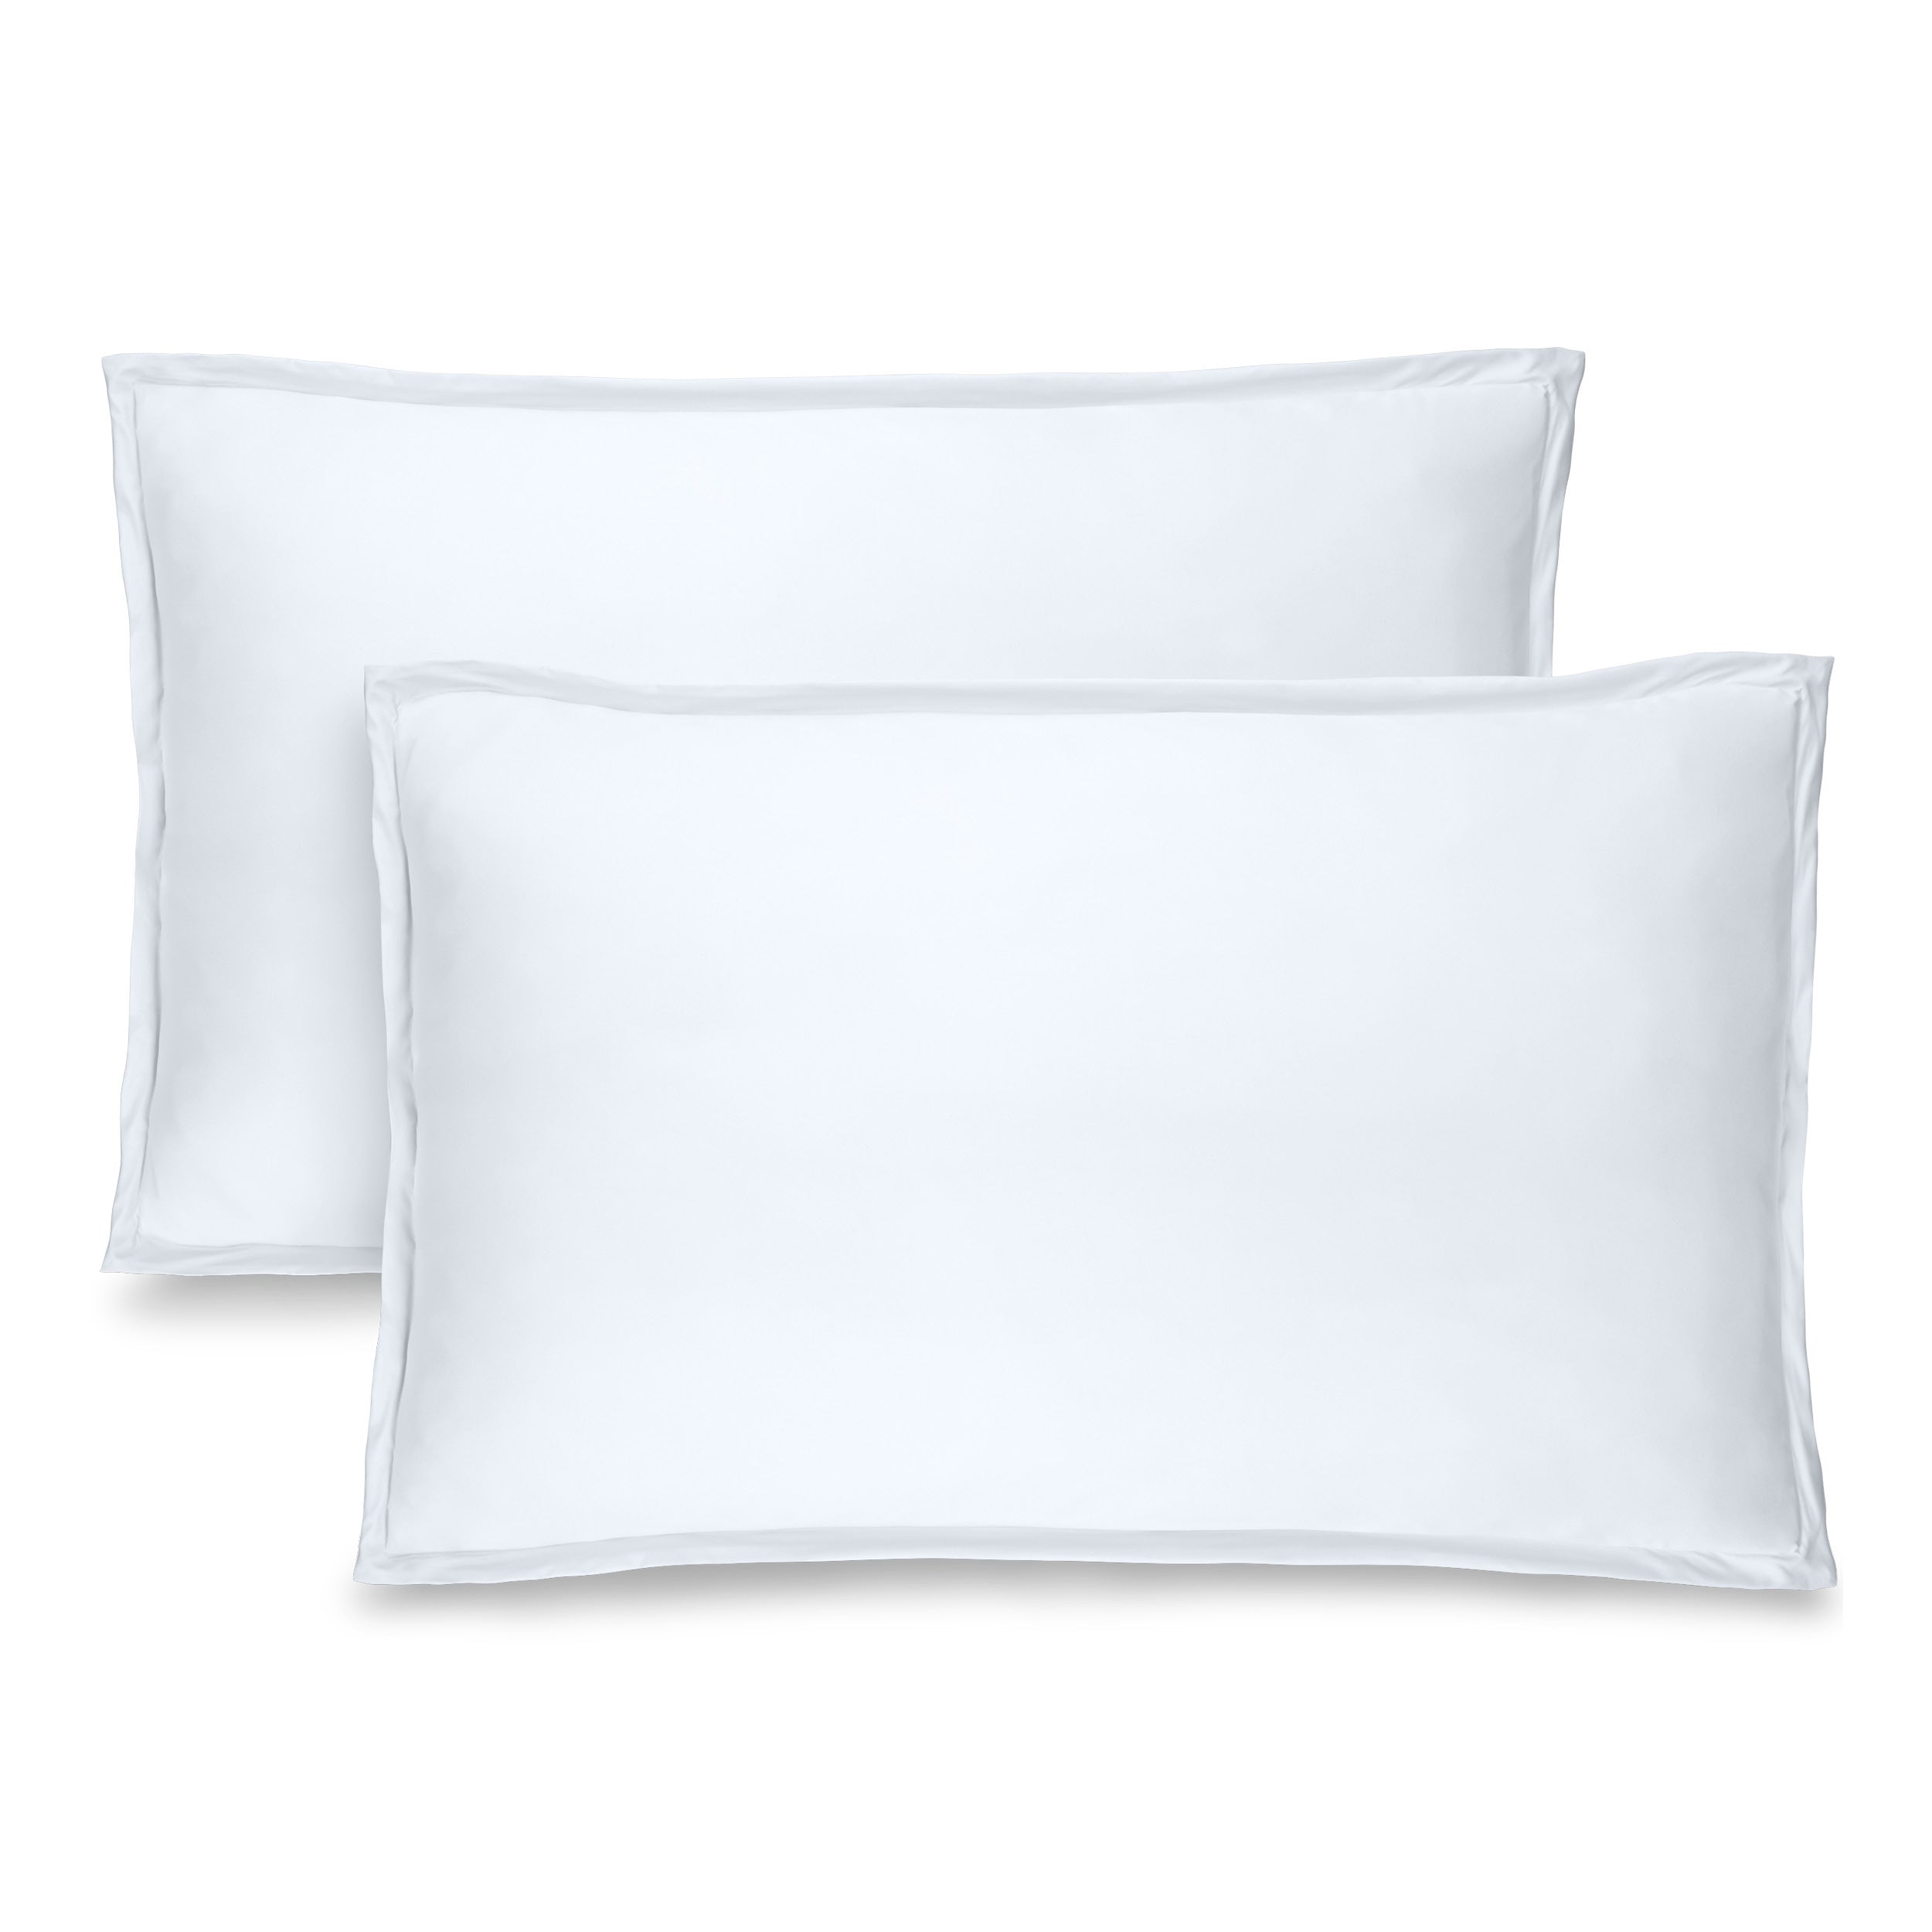 Two white pillow shams on pillows standing up with one behind the other